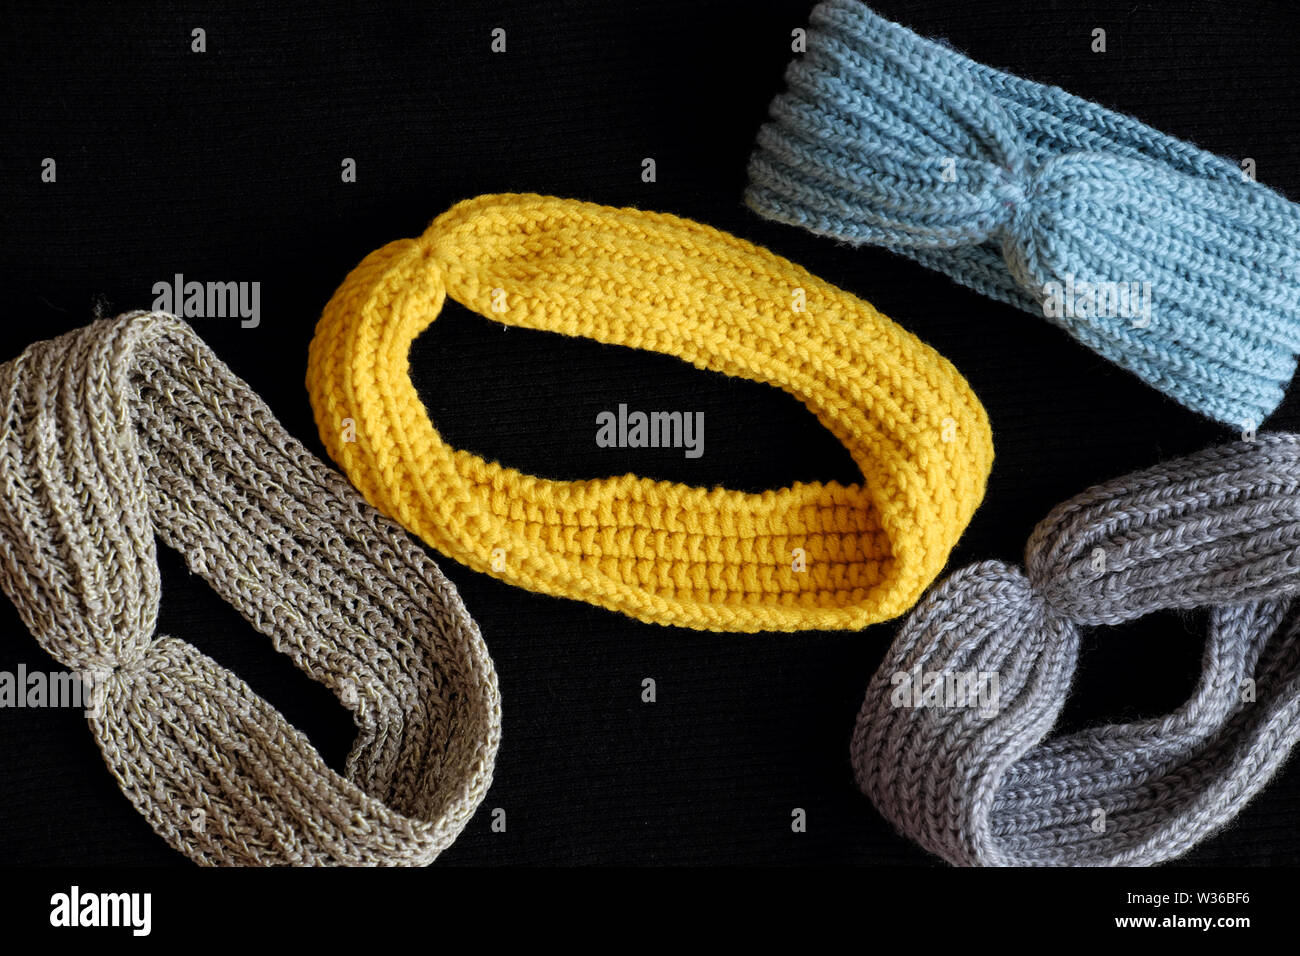 Group of handmade head bands knit in free time as leisure activity at home, accessories for woman from yarn Stock Photo